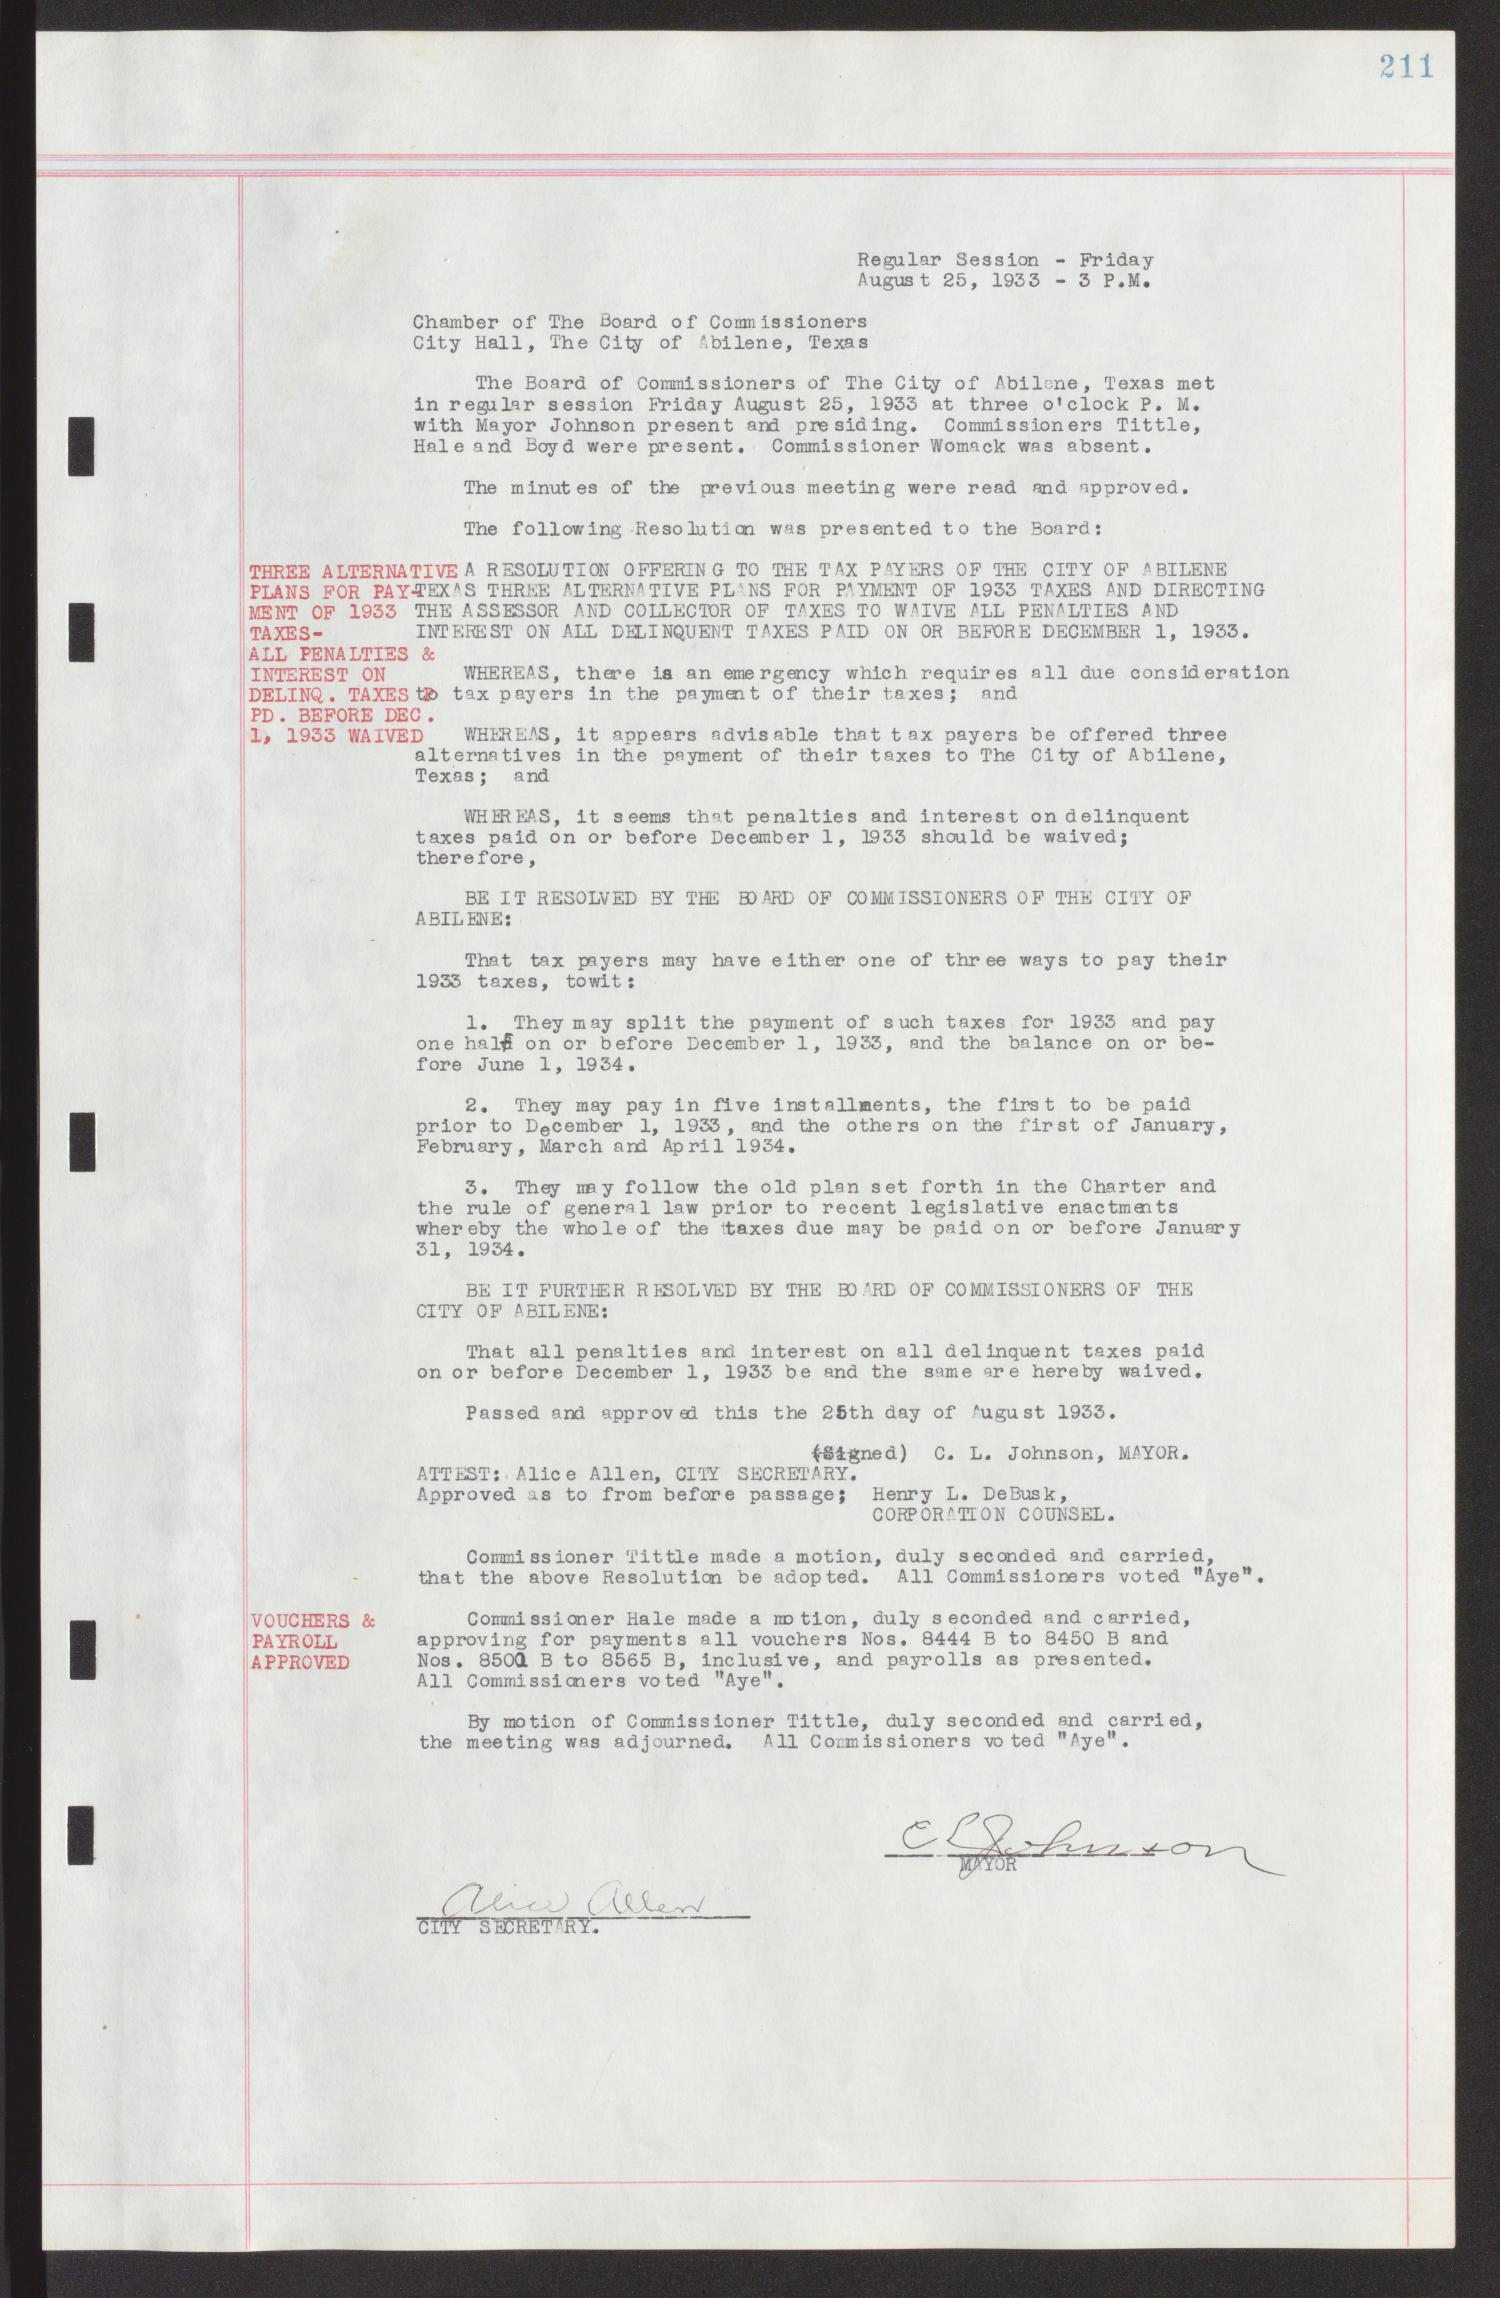 [Abilene Board of Commissioners Minutes: 1931-1938]
                                                
                                                    211
                                                